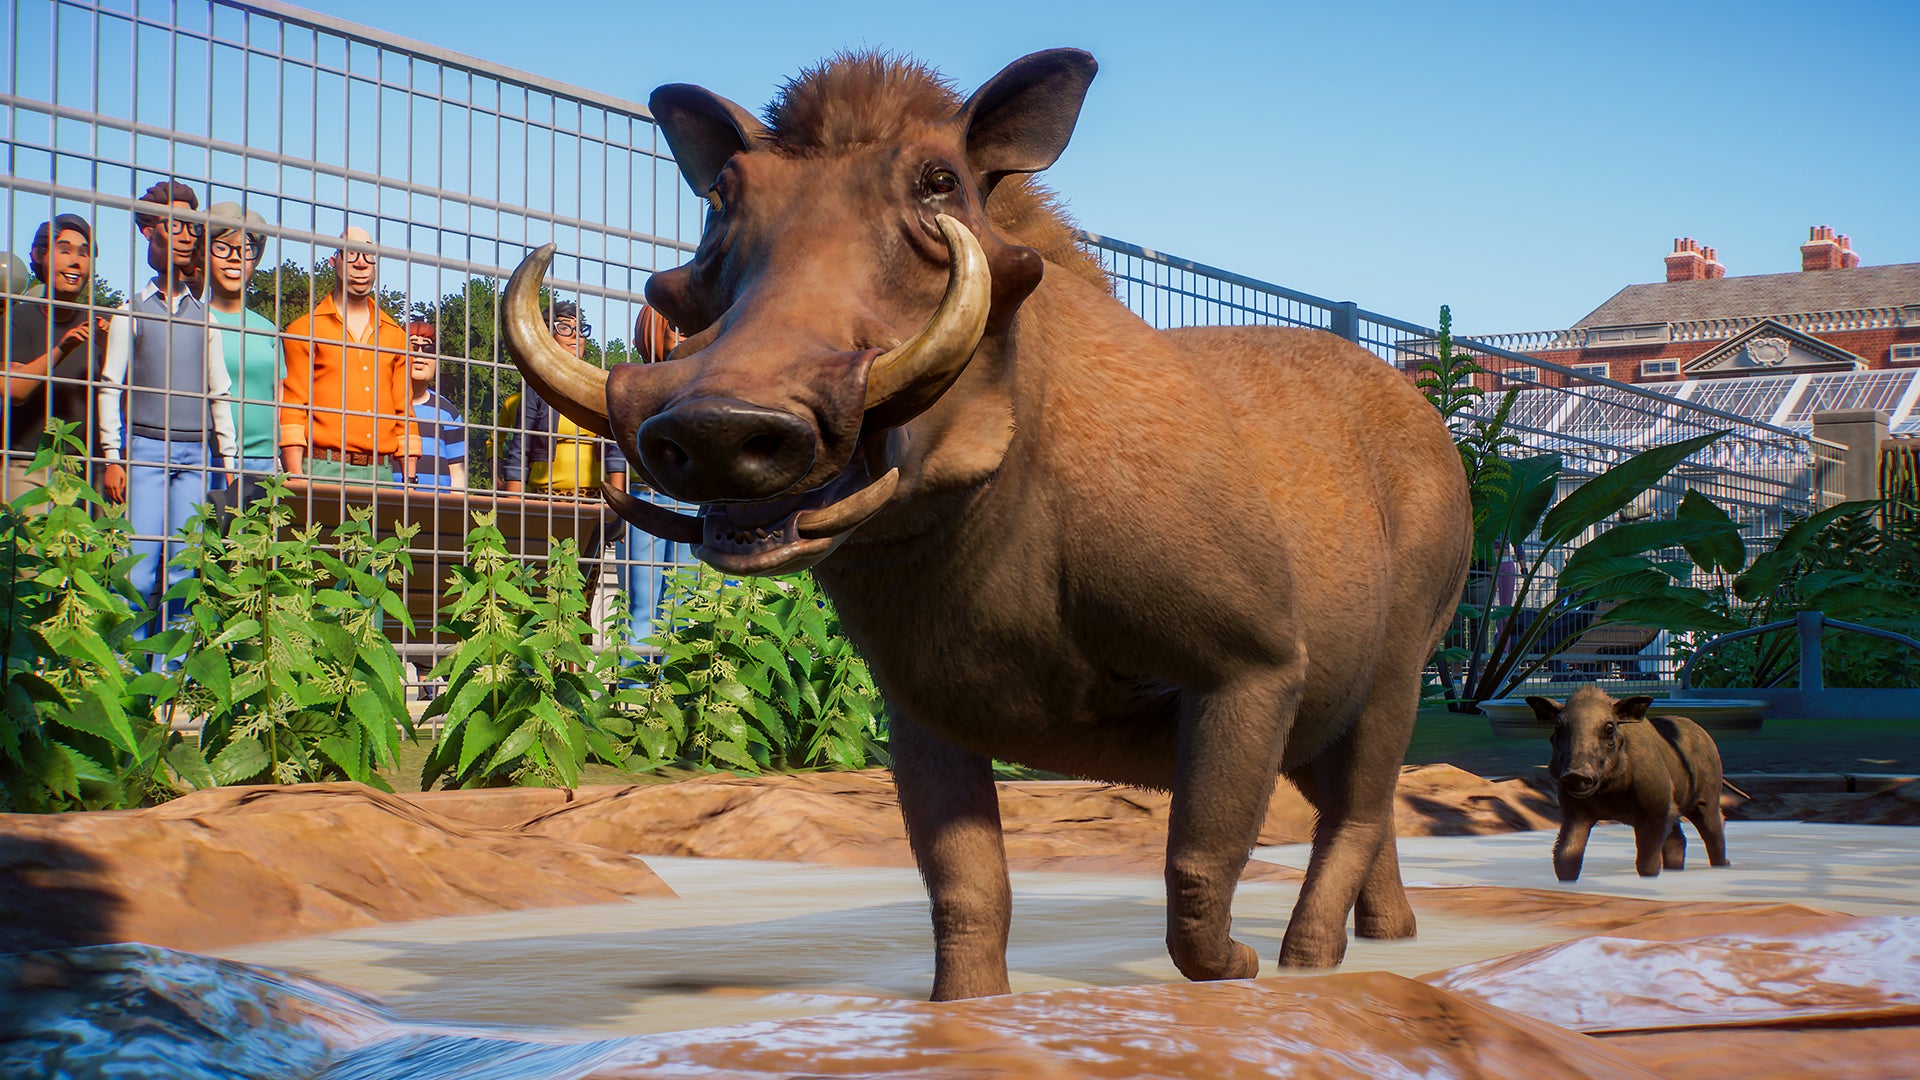 Image for Planet Zoo has great poop physics, runaway animals, and loads of other good animal action